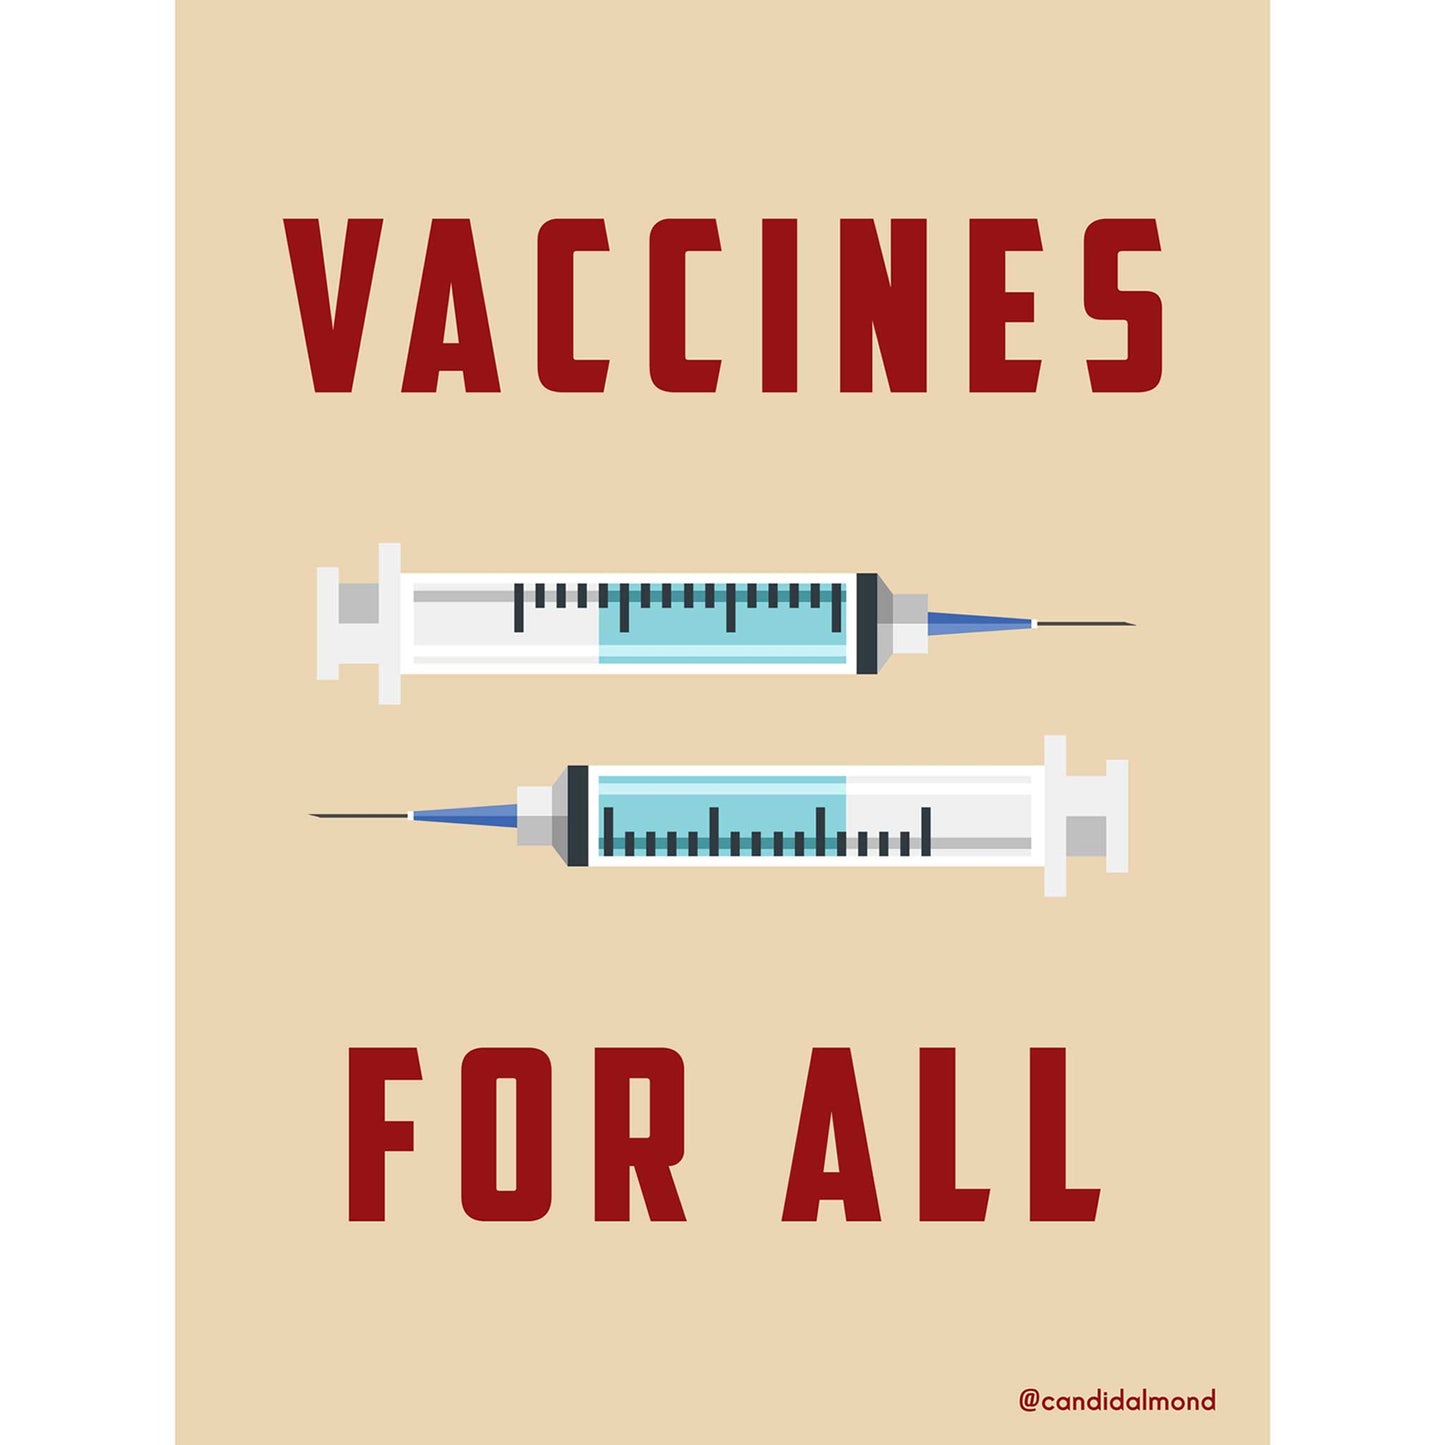 'Vaccines For All' FREE Digital Download